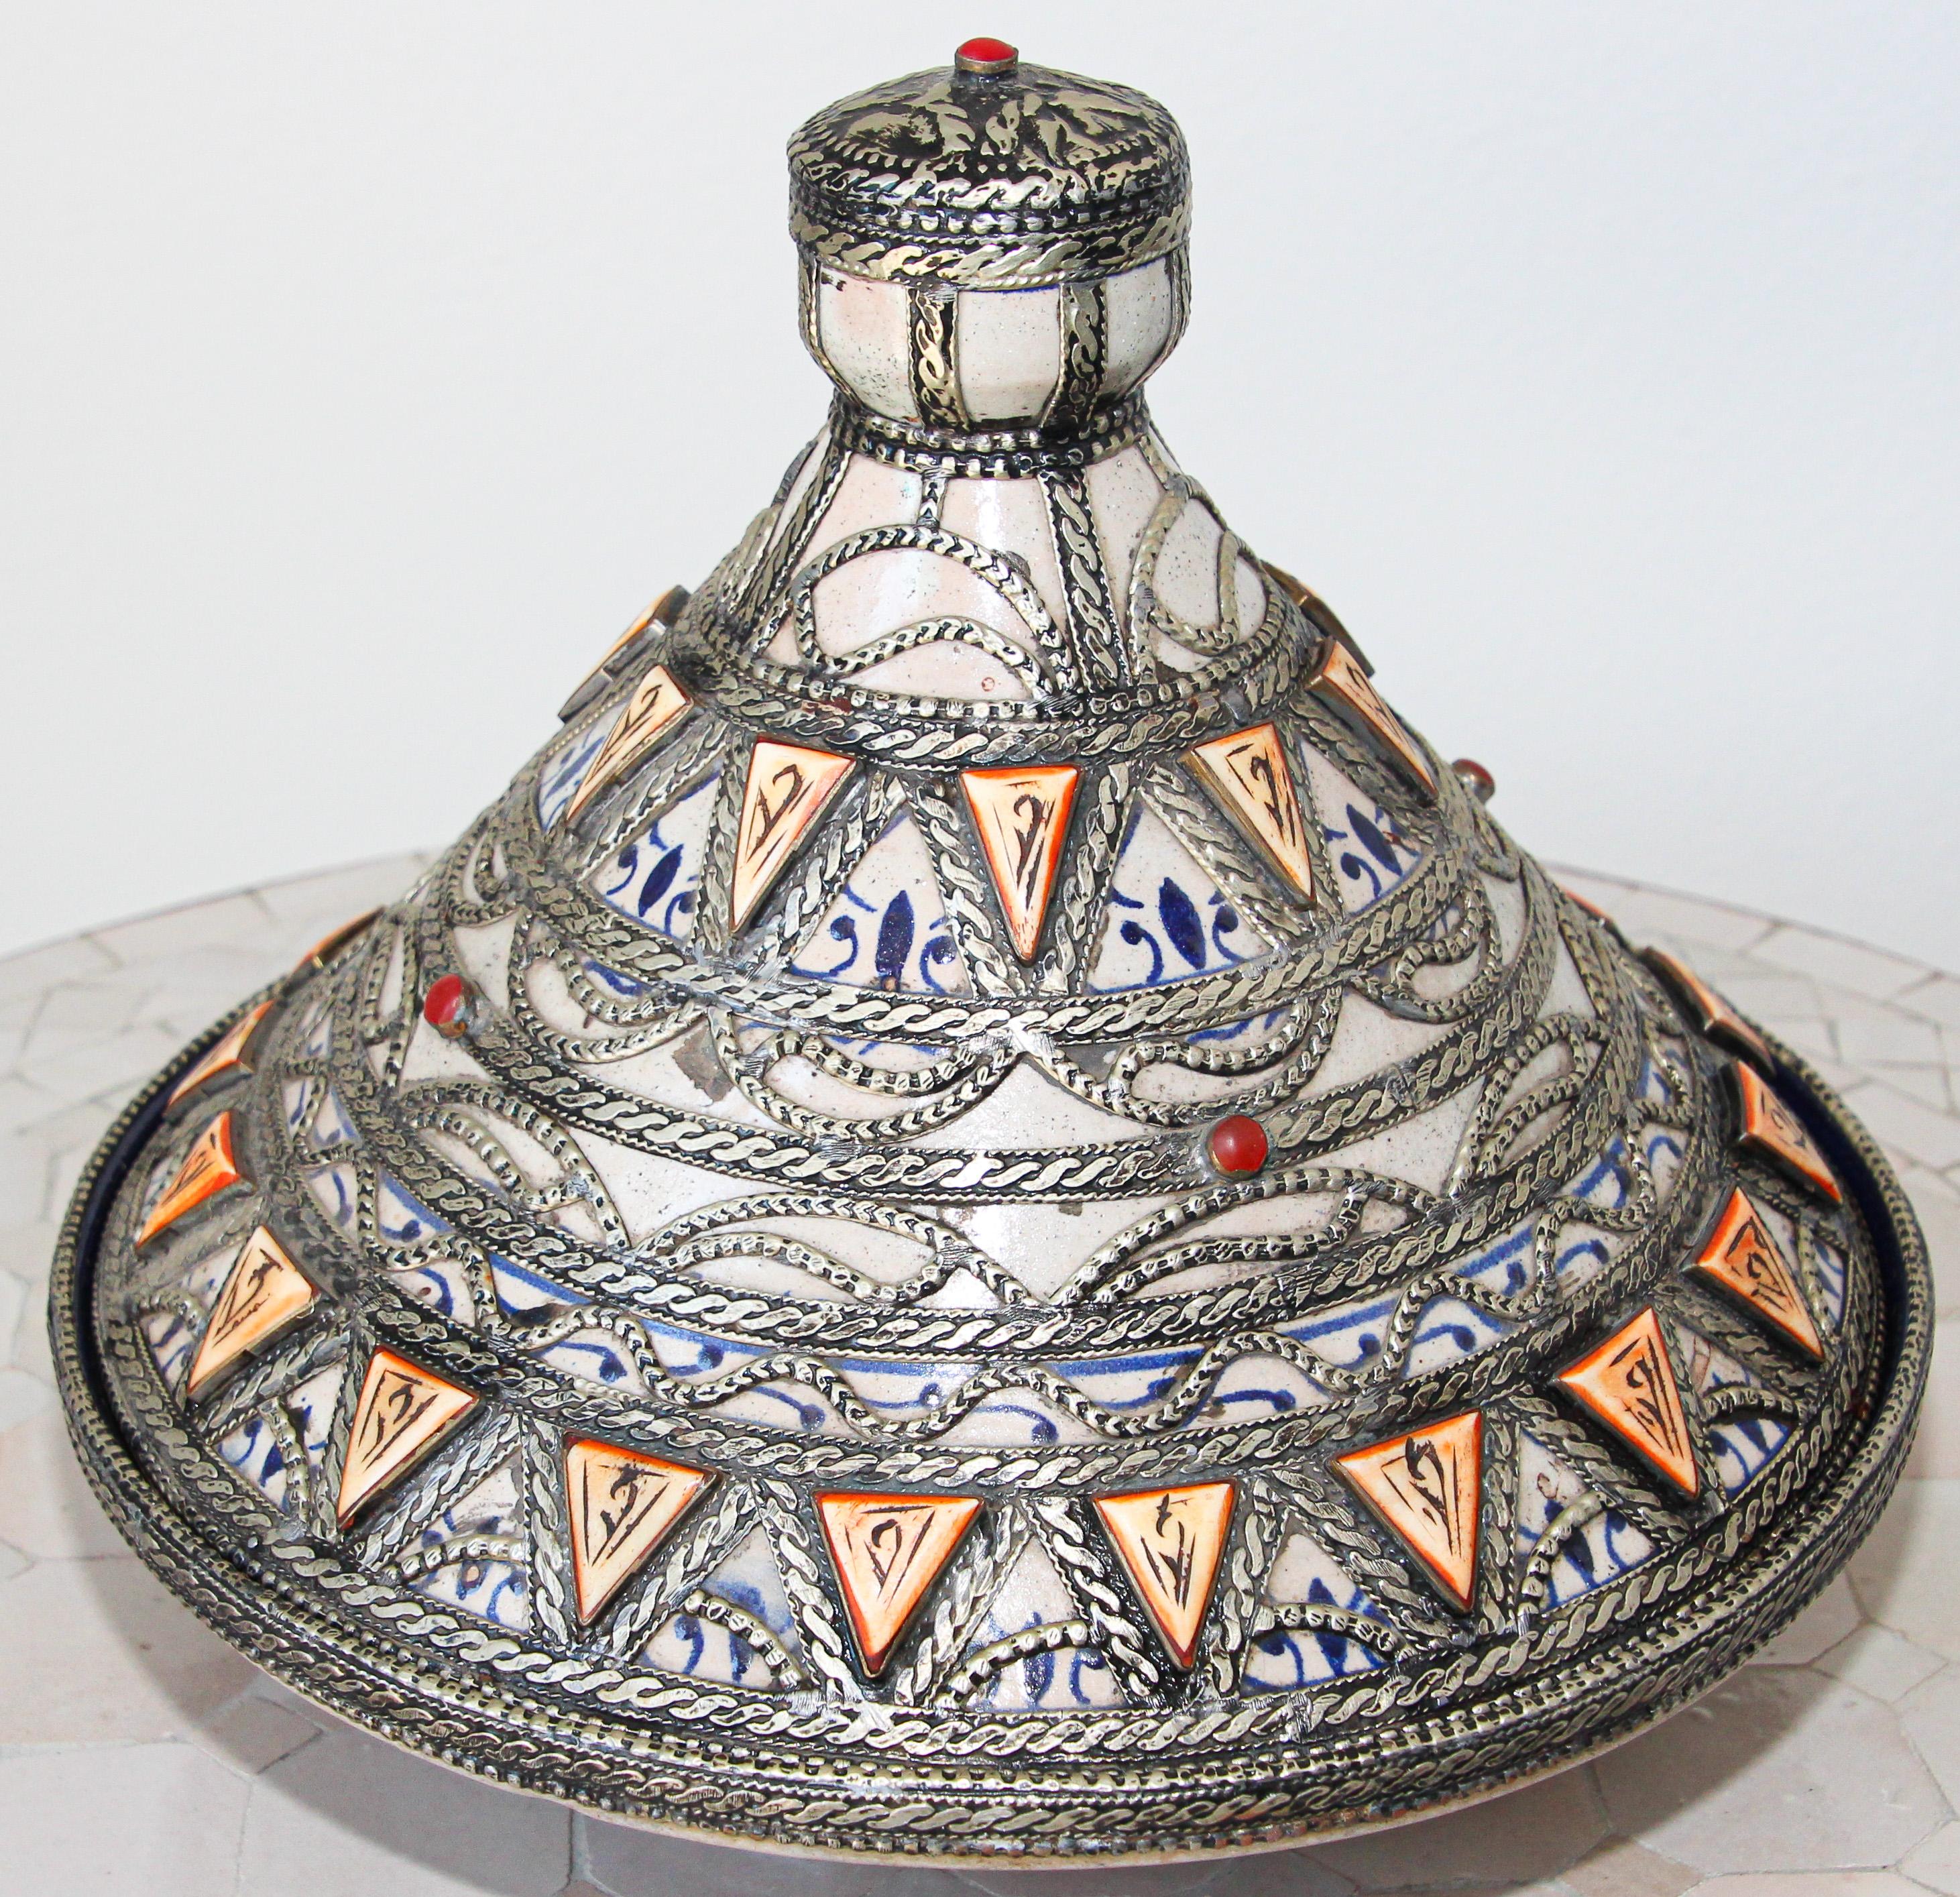 Moroccan Ceramic Polychrome Tajine with Leather Stones and Metal Overlay 5